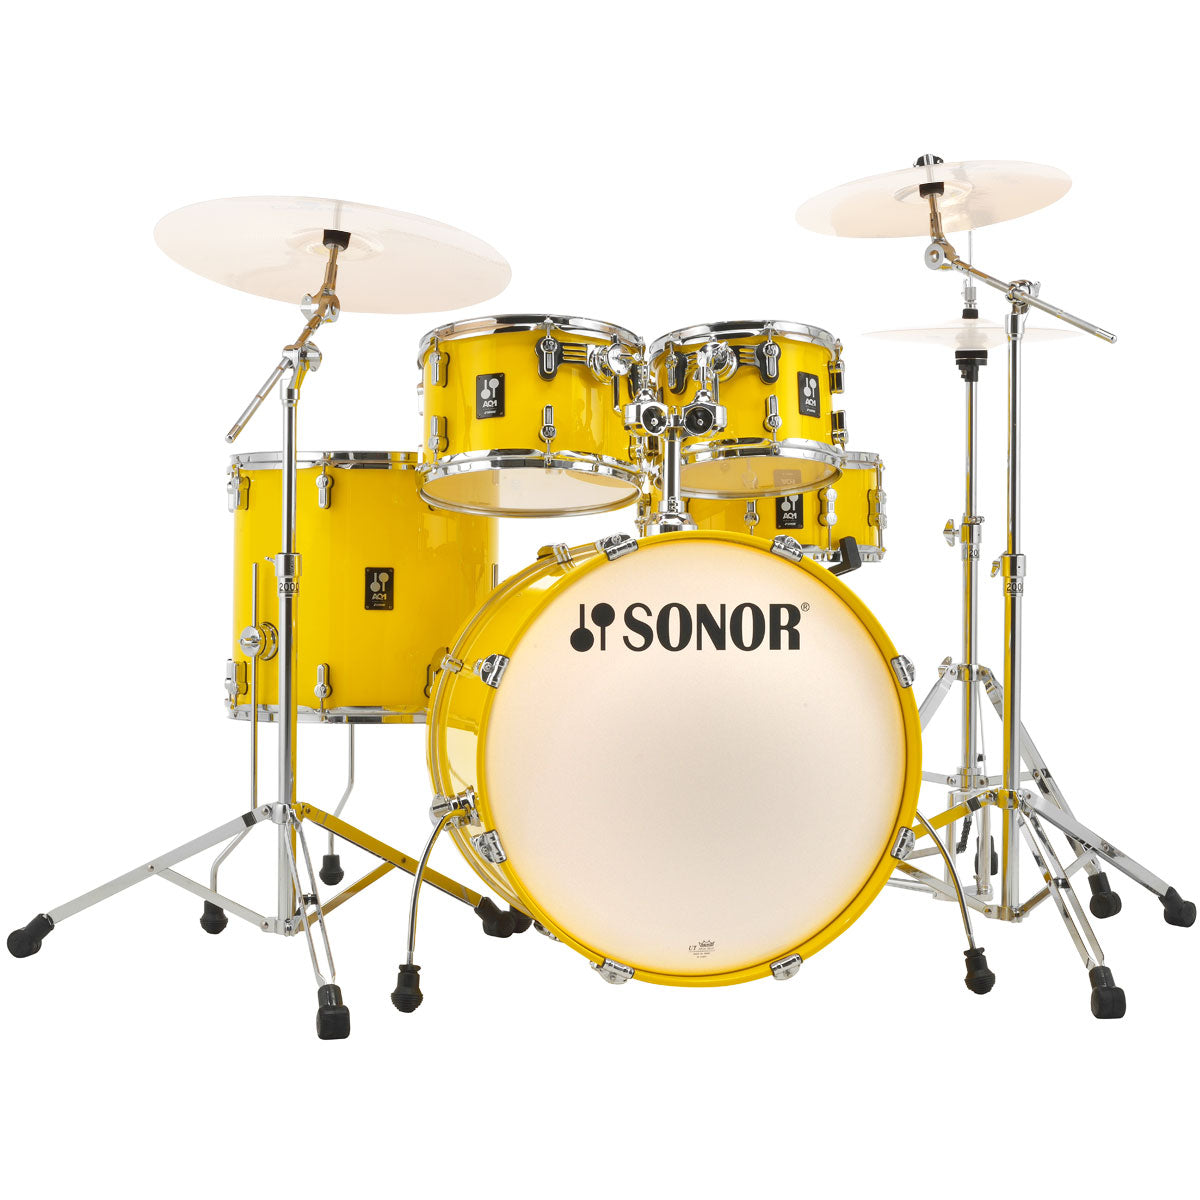 SONOR AQ1 Limited Edition 5-pc Drum Kit With Hardware (Lite Yellow)